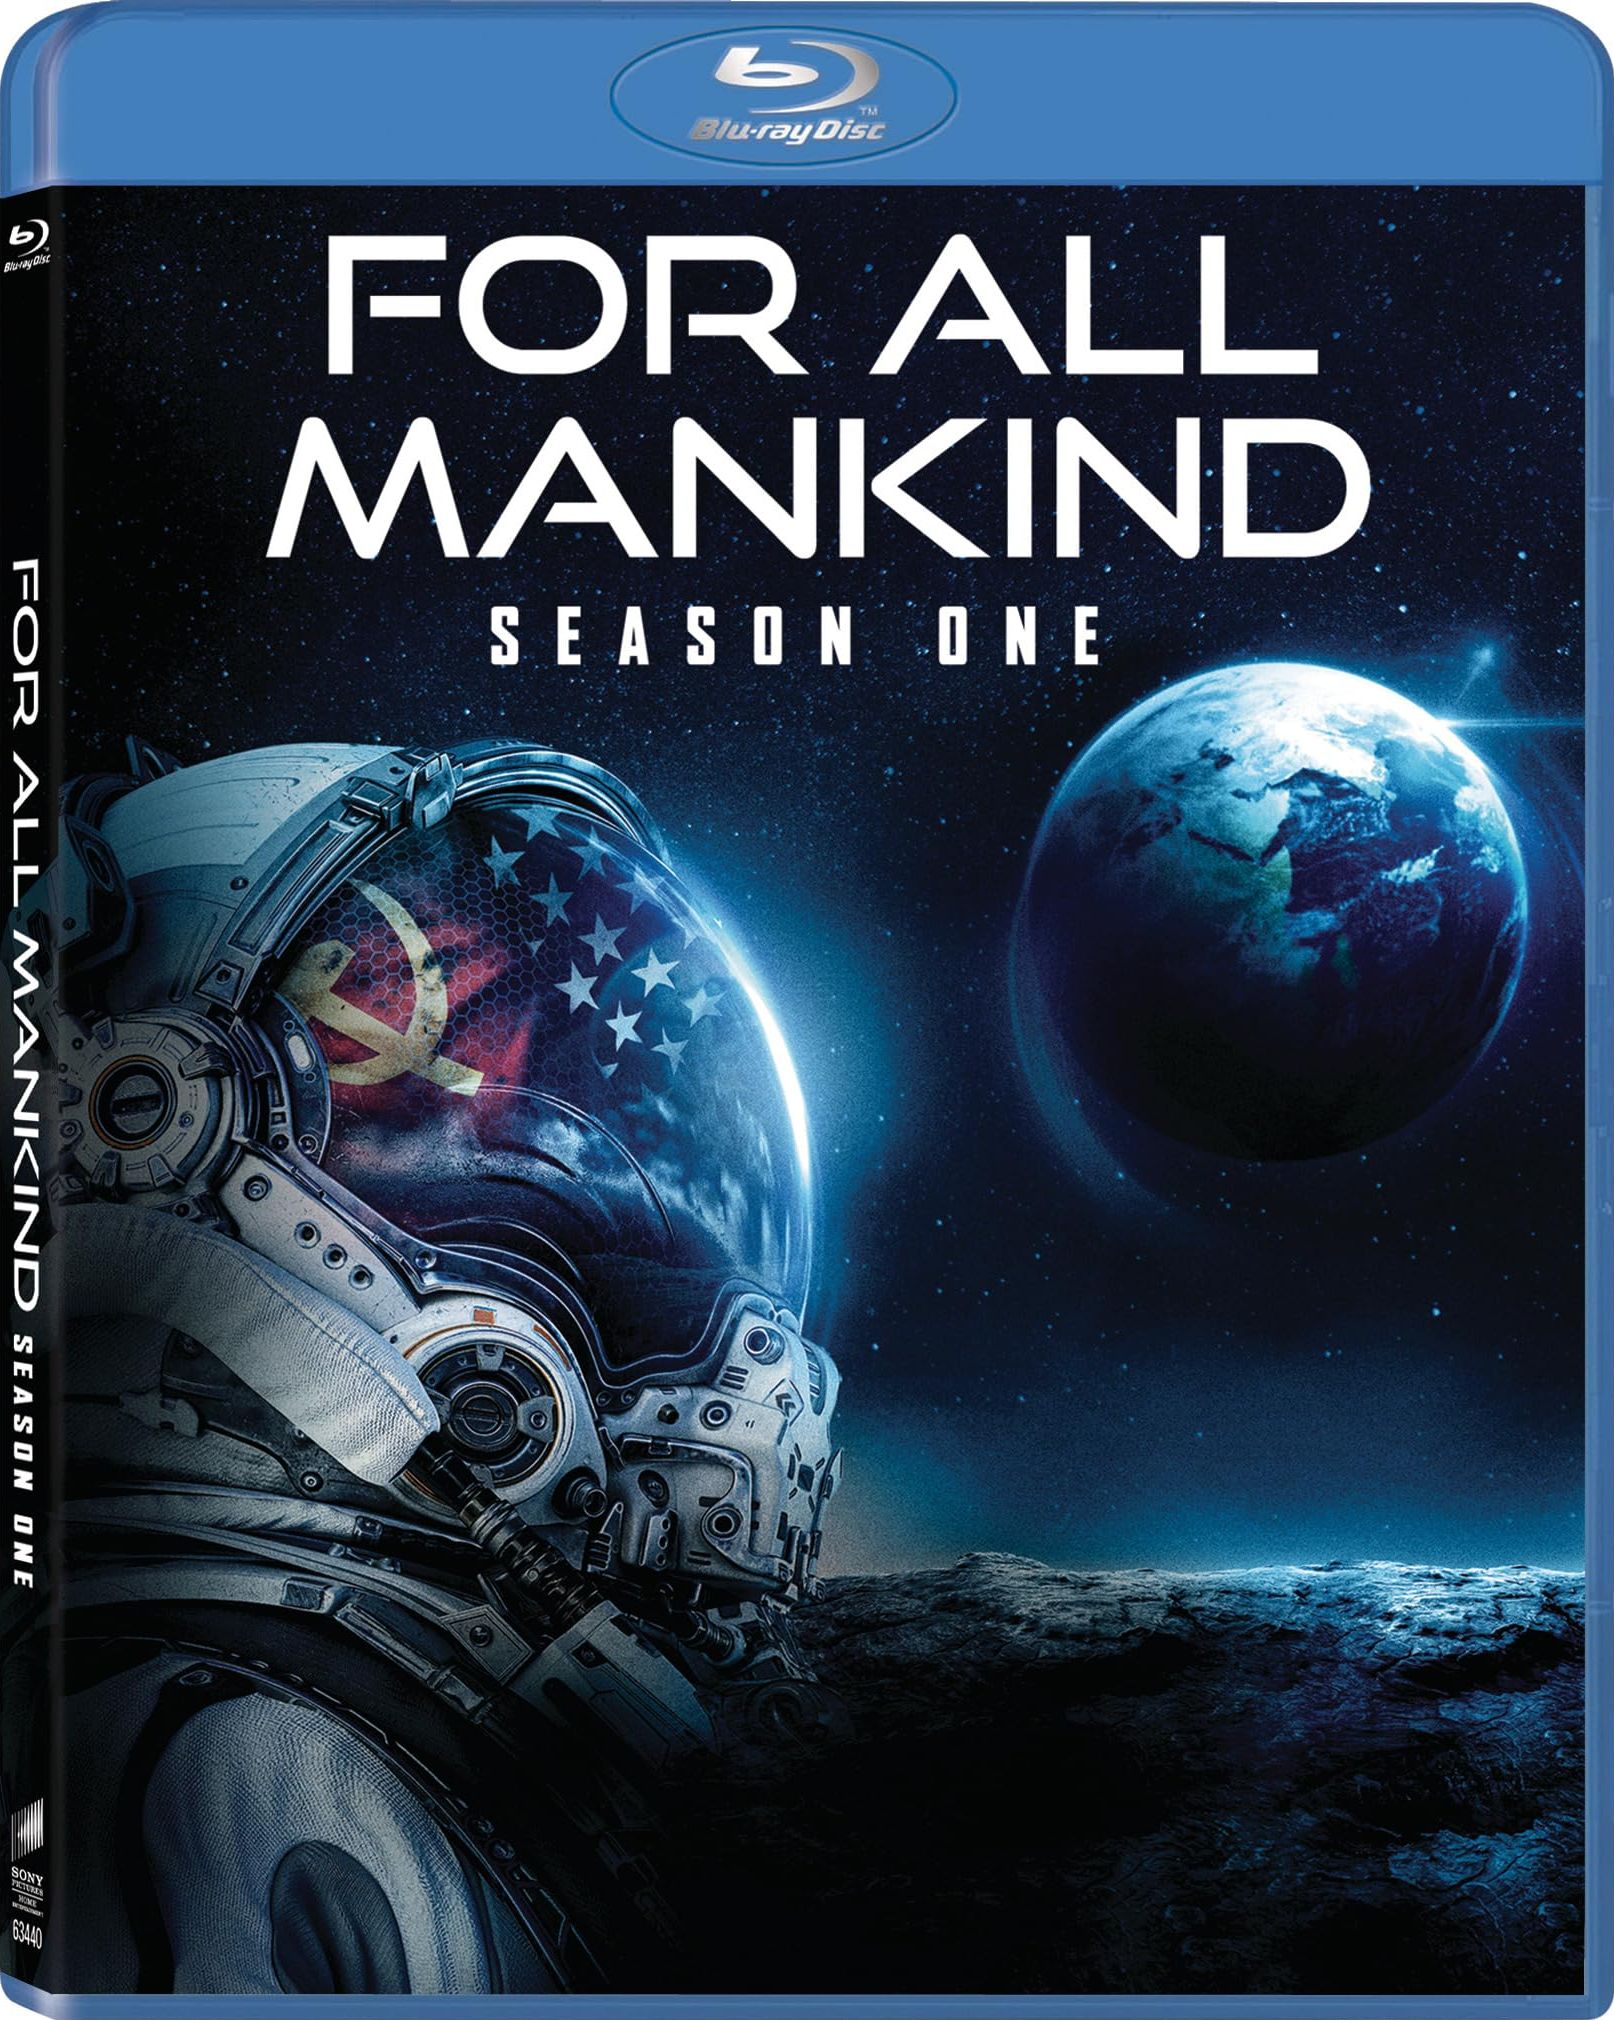 For All Mankind DVD Release Date